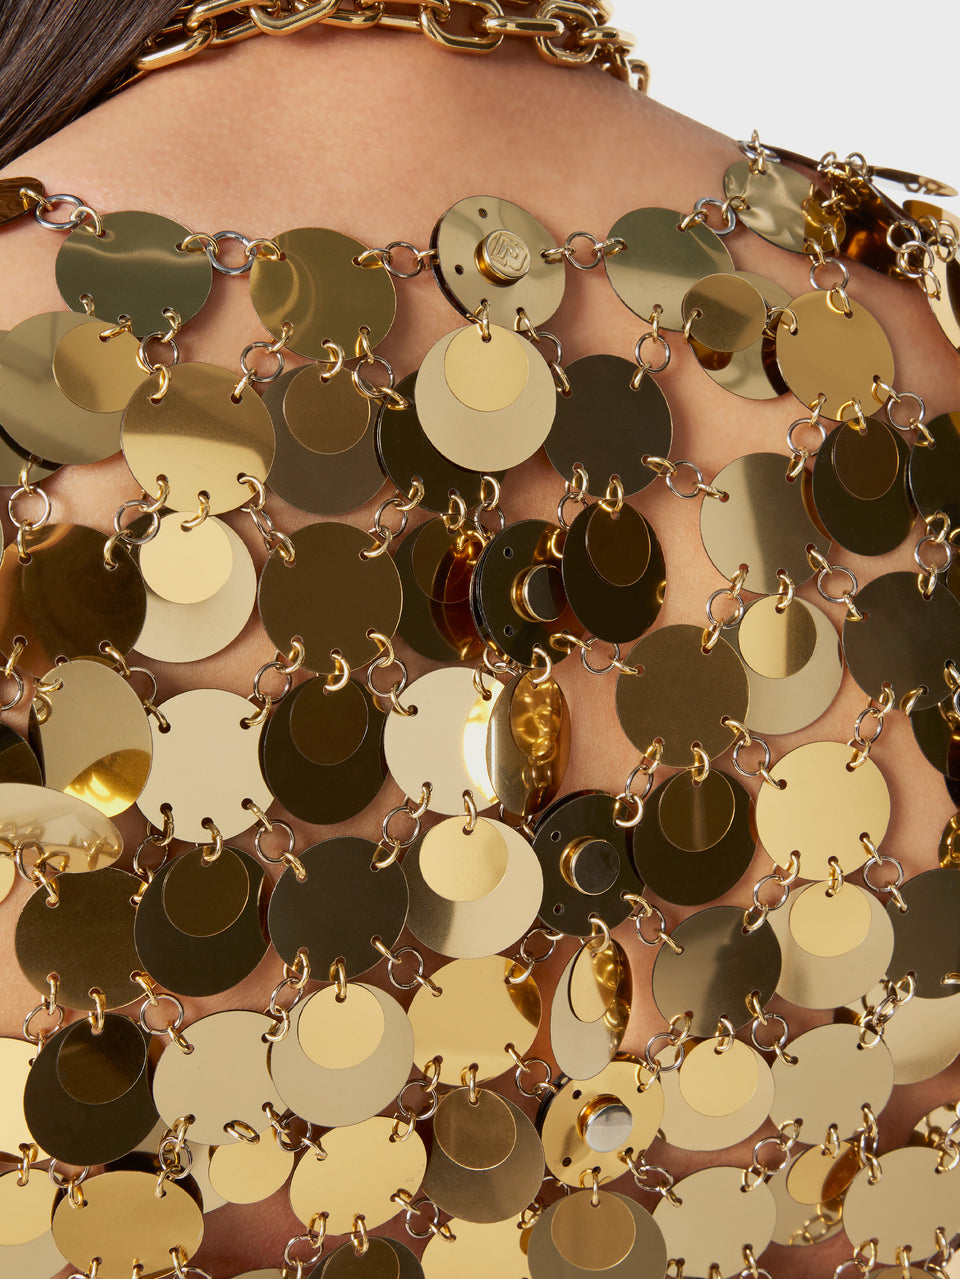 The gold sparkle discs top